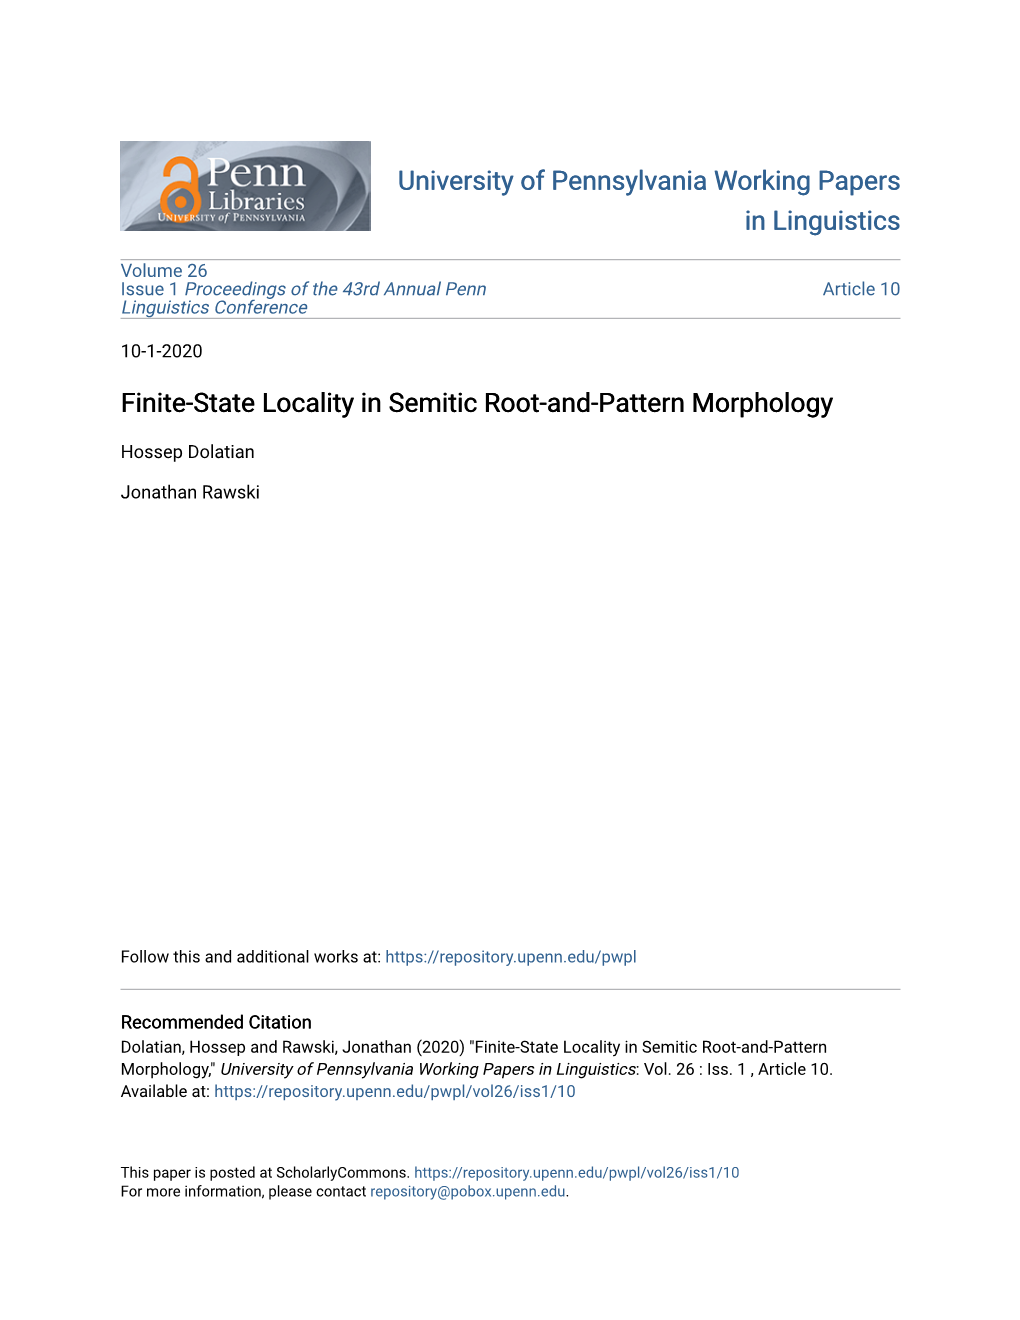 Finite-State Locality in Semitic Root-And-Pattern Morphology